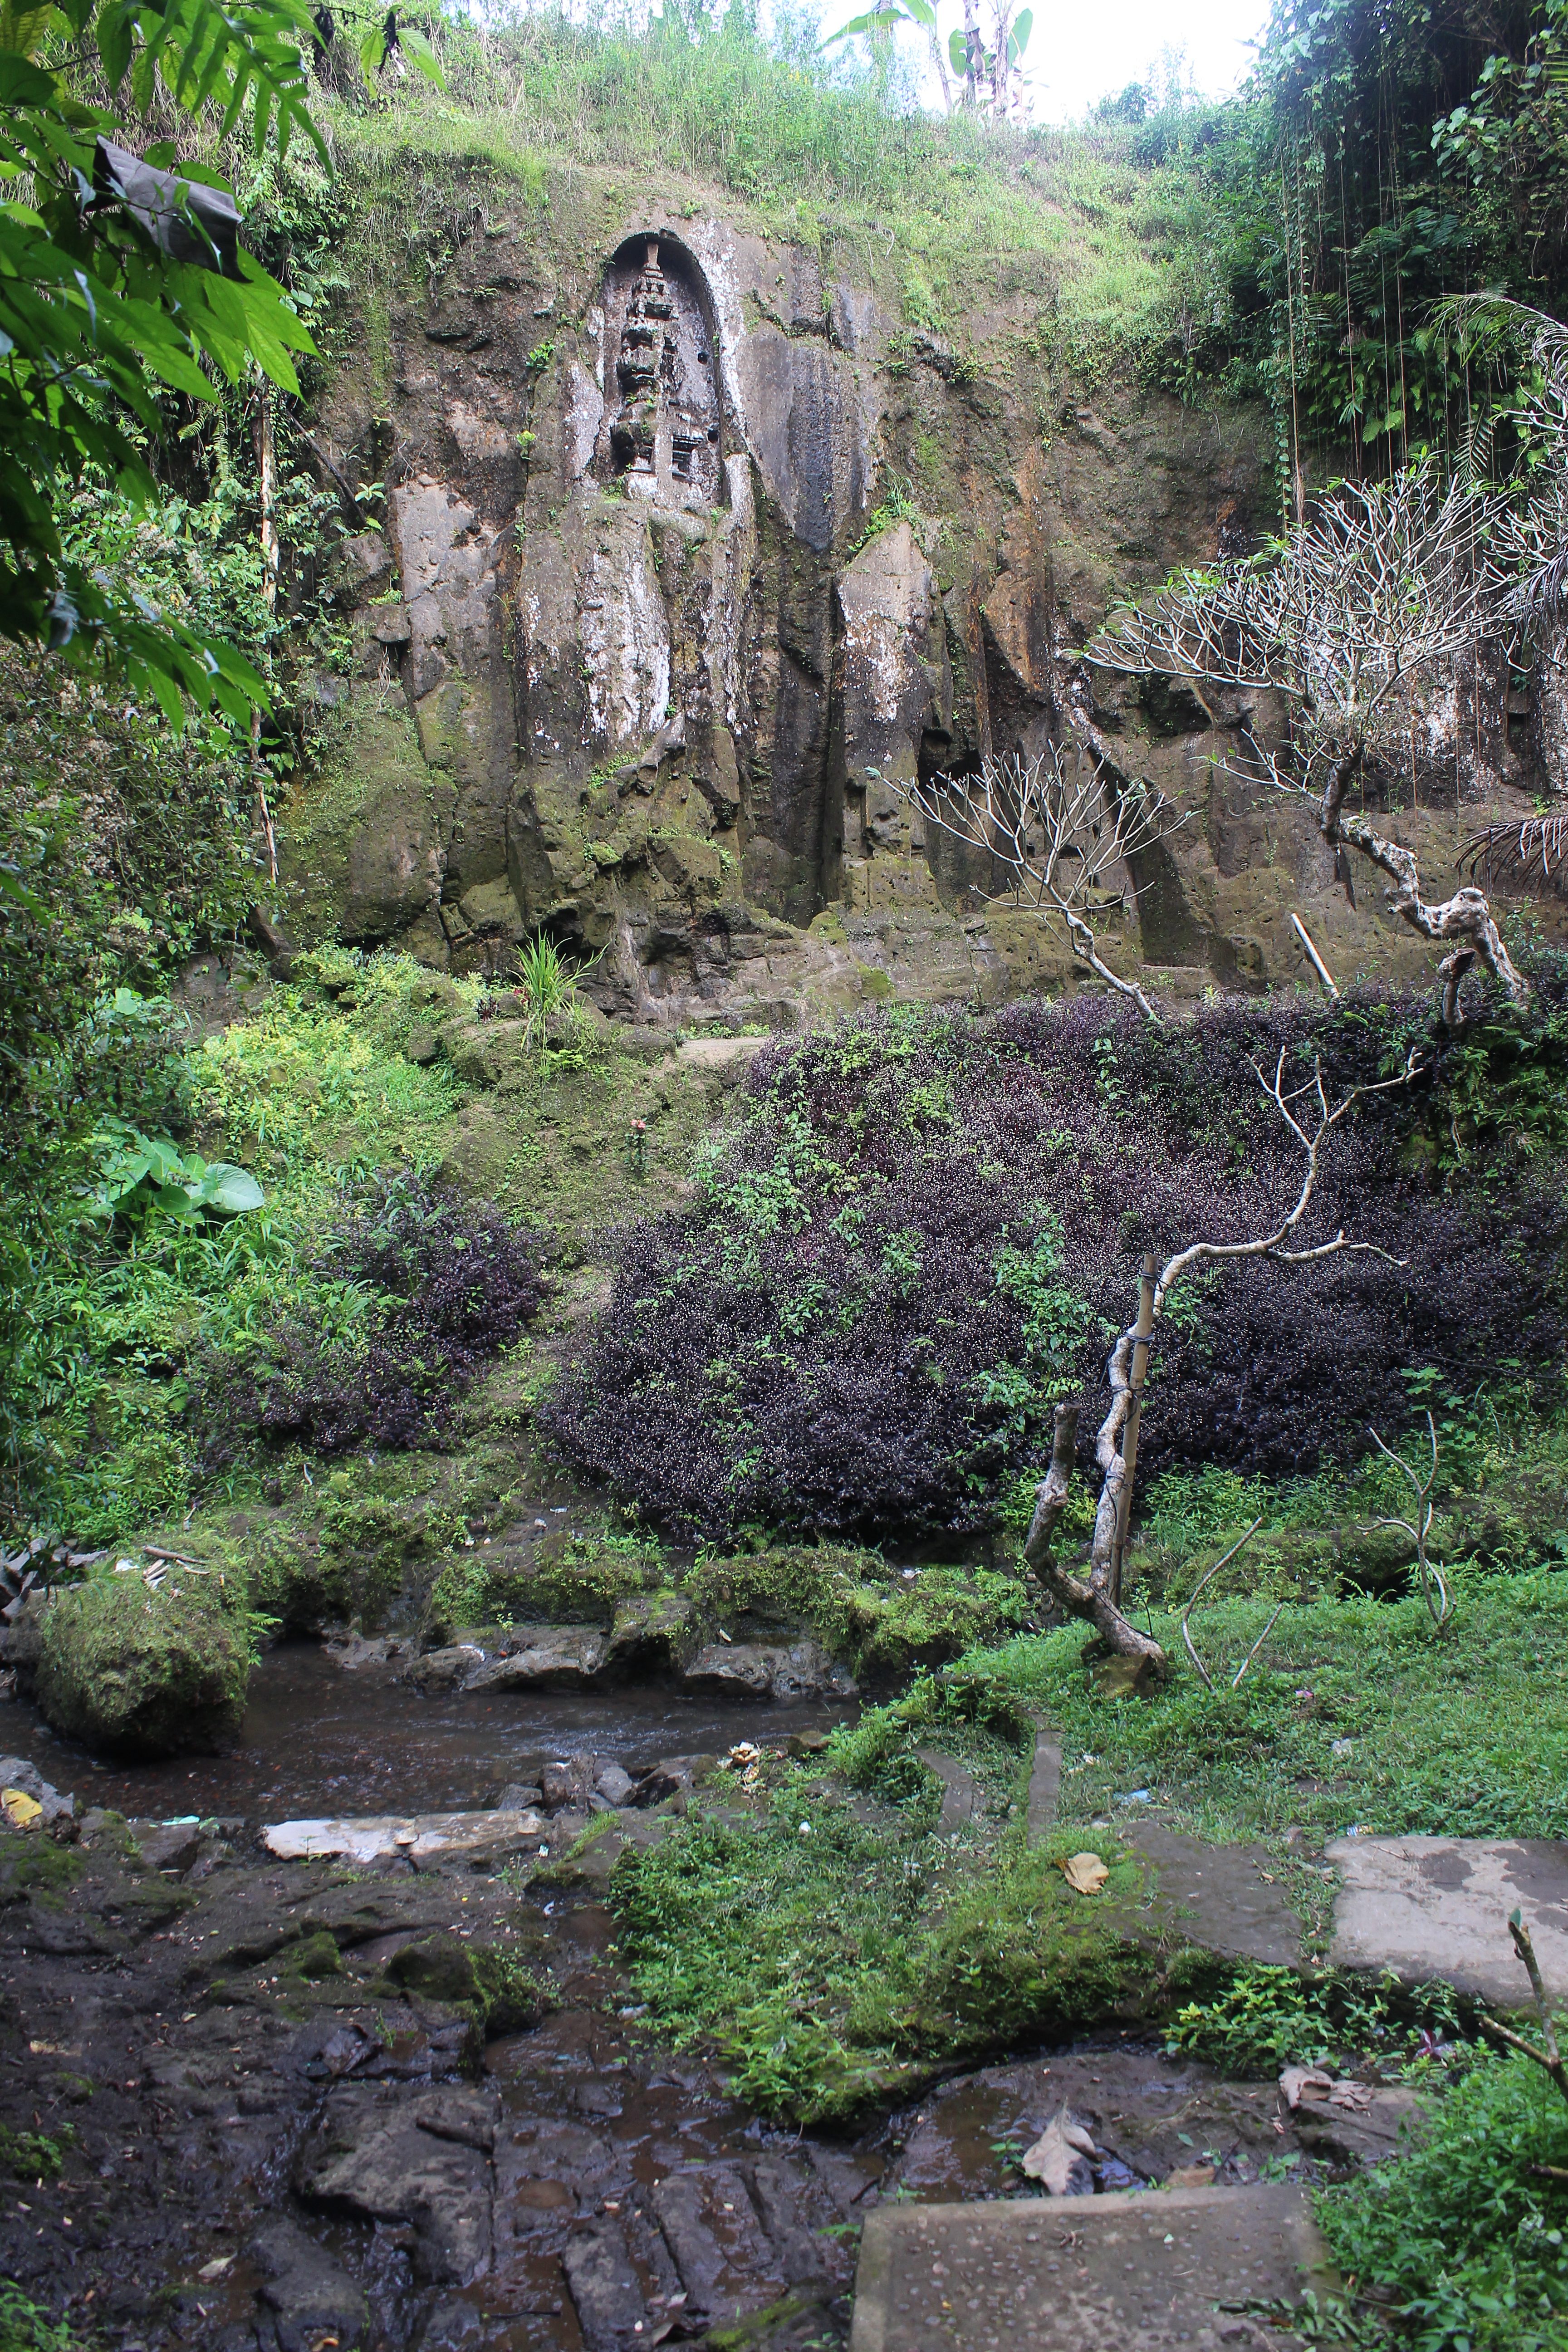 Small rock-cut shrine in the river ravine seen from below